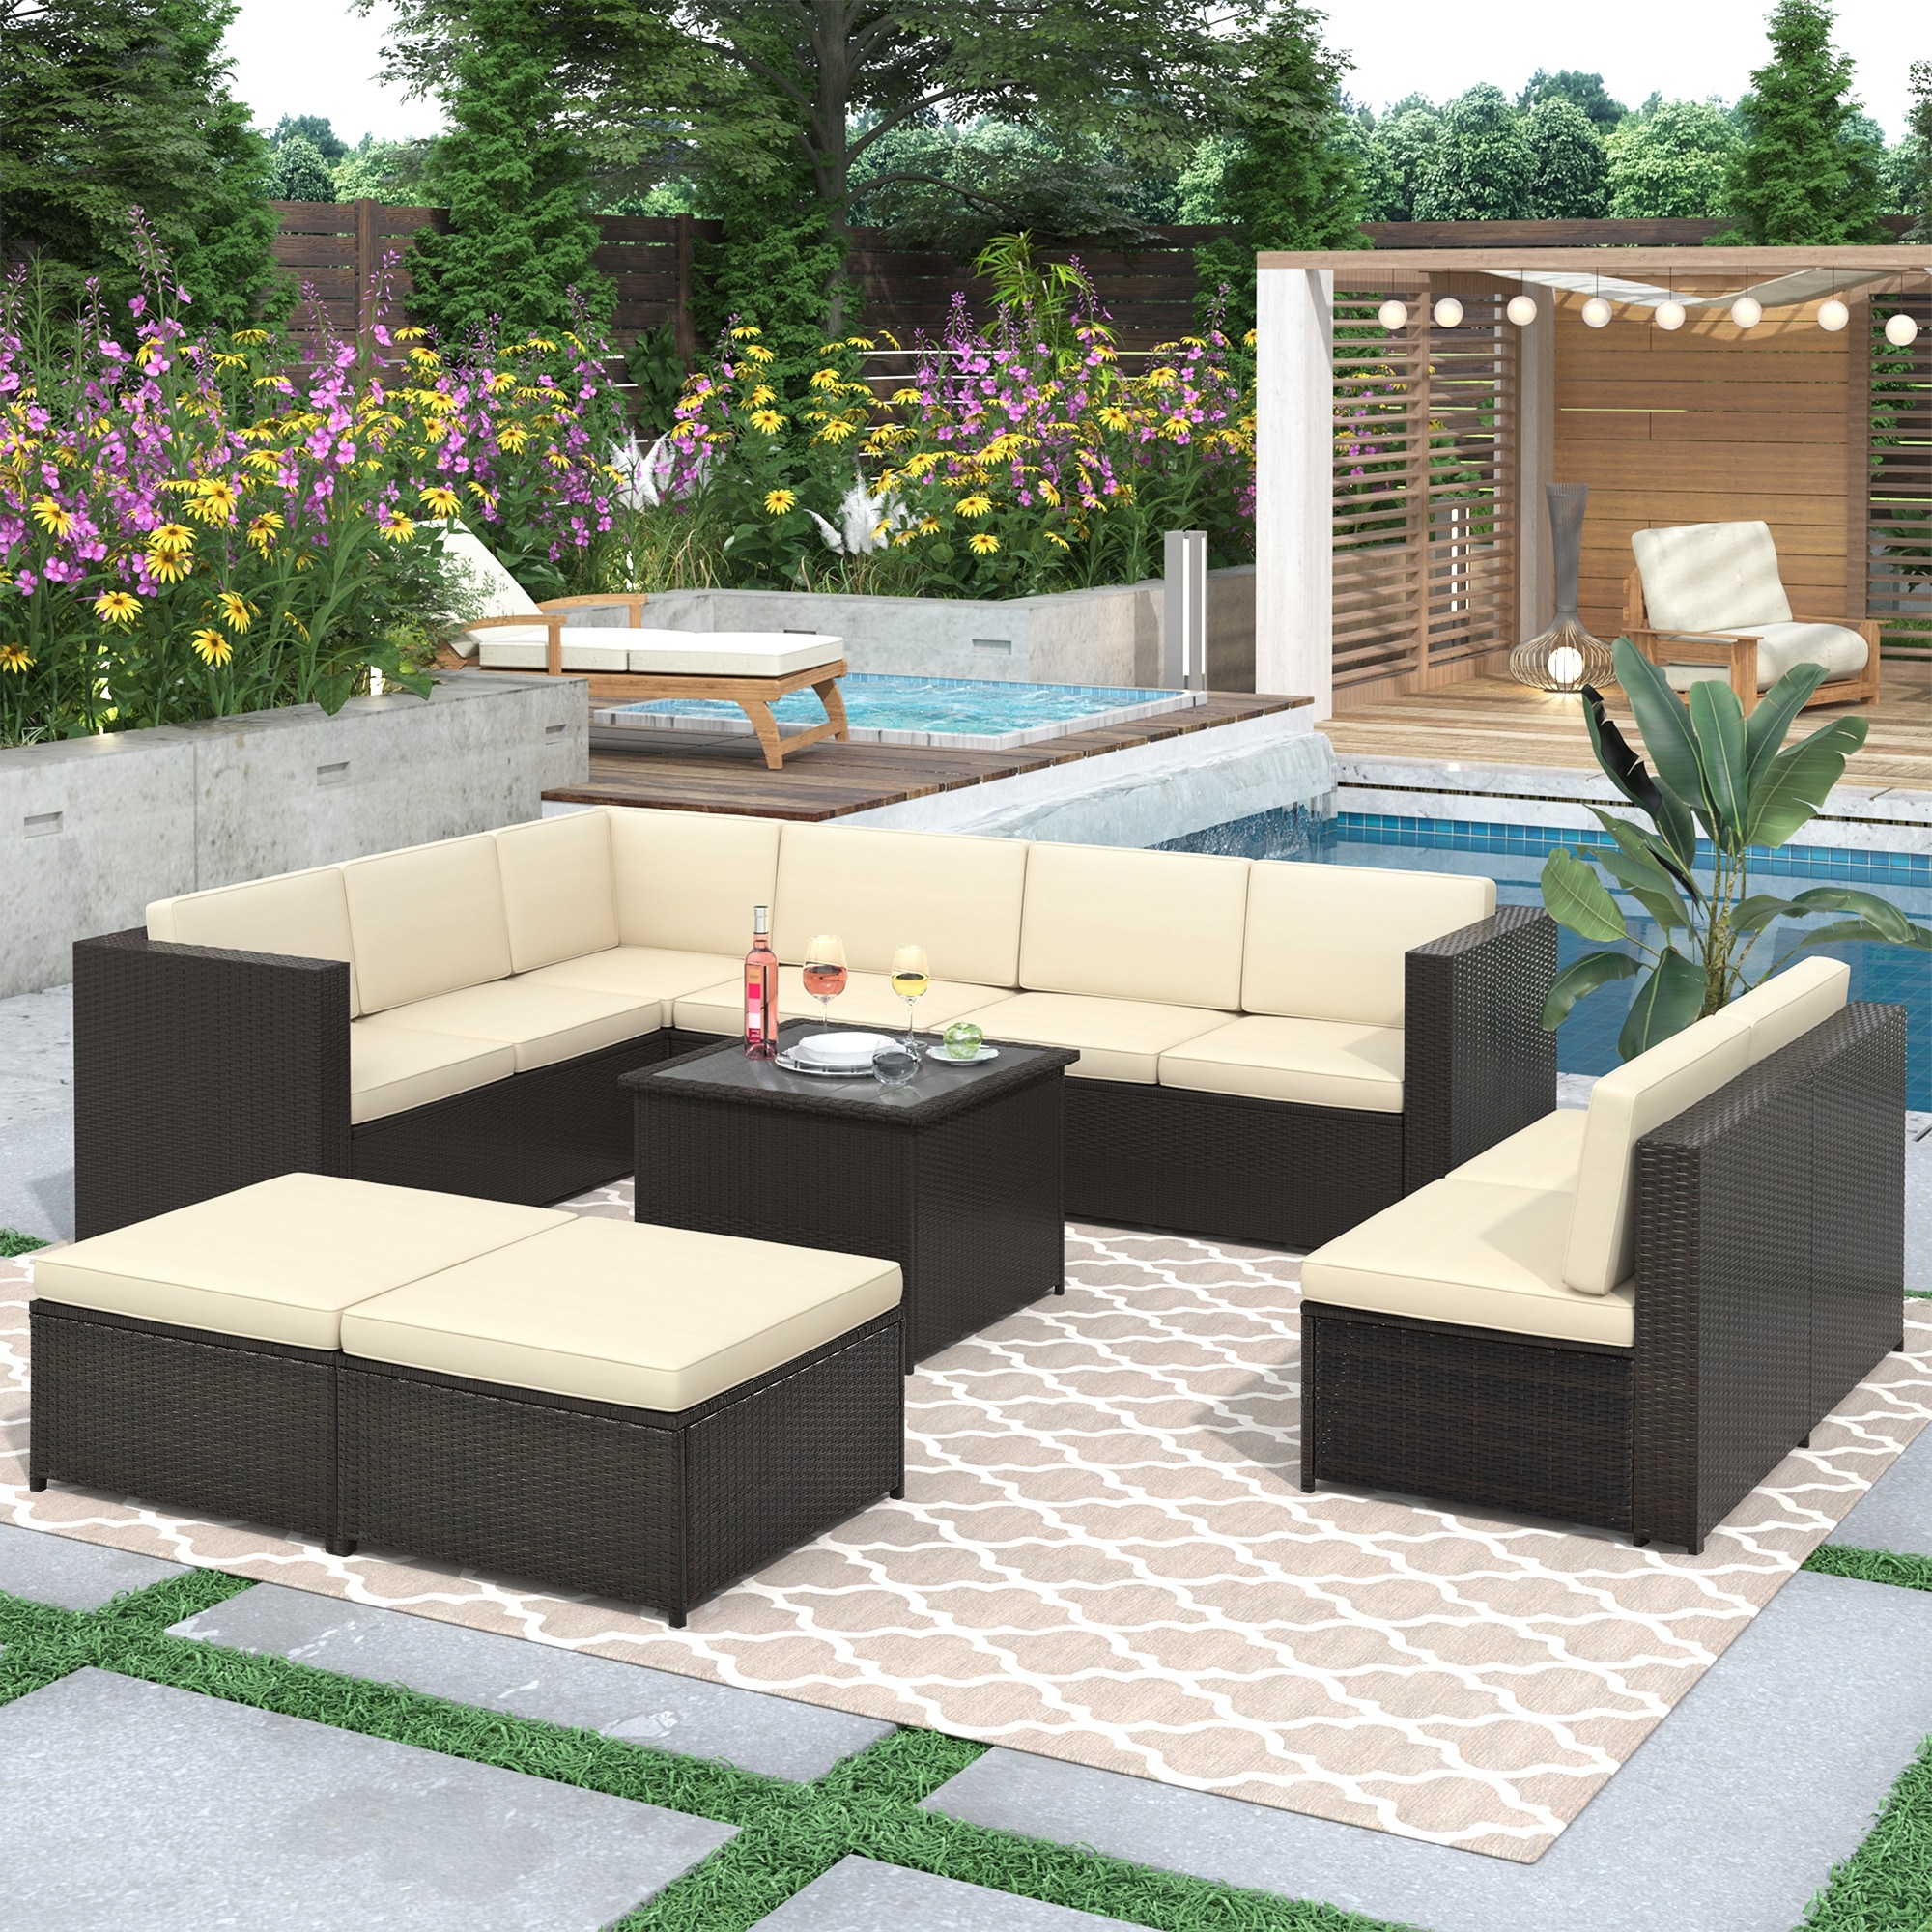 Luxurious 9-piece Rattan Sectional Sofa Set With Plush Cushions and Table